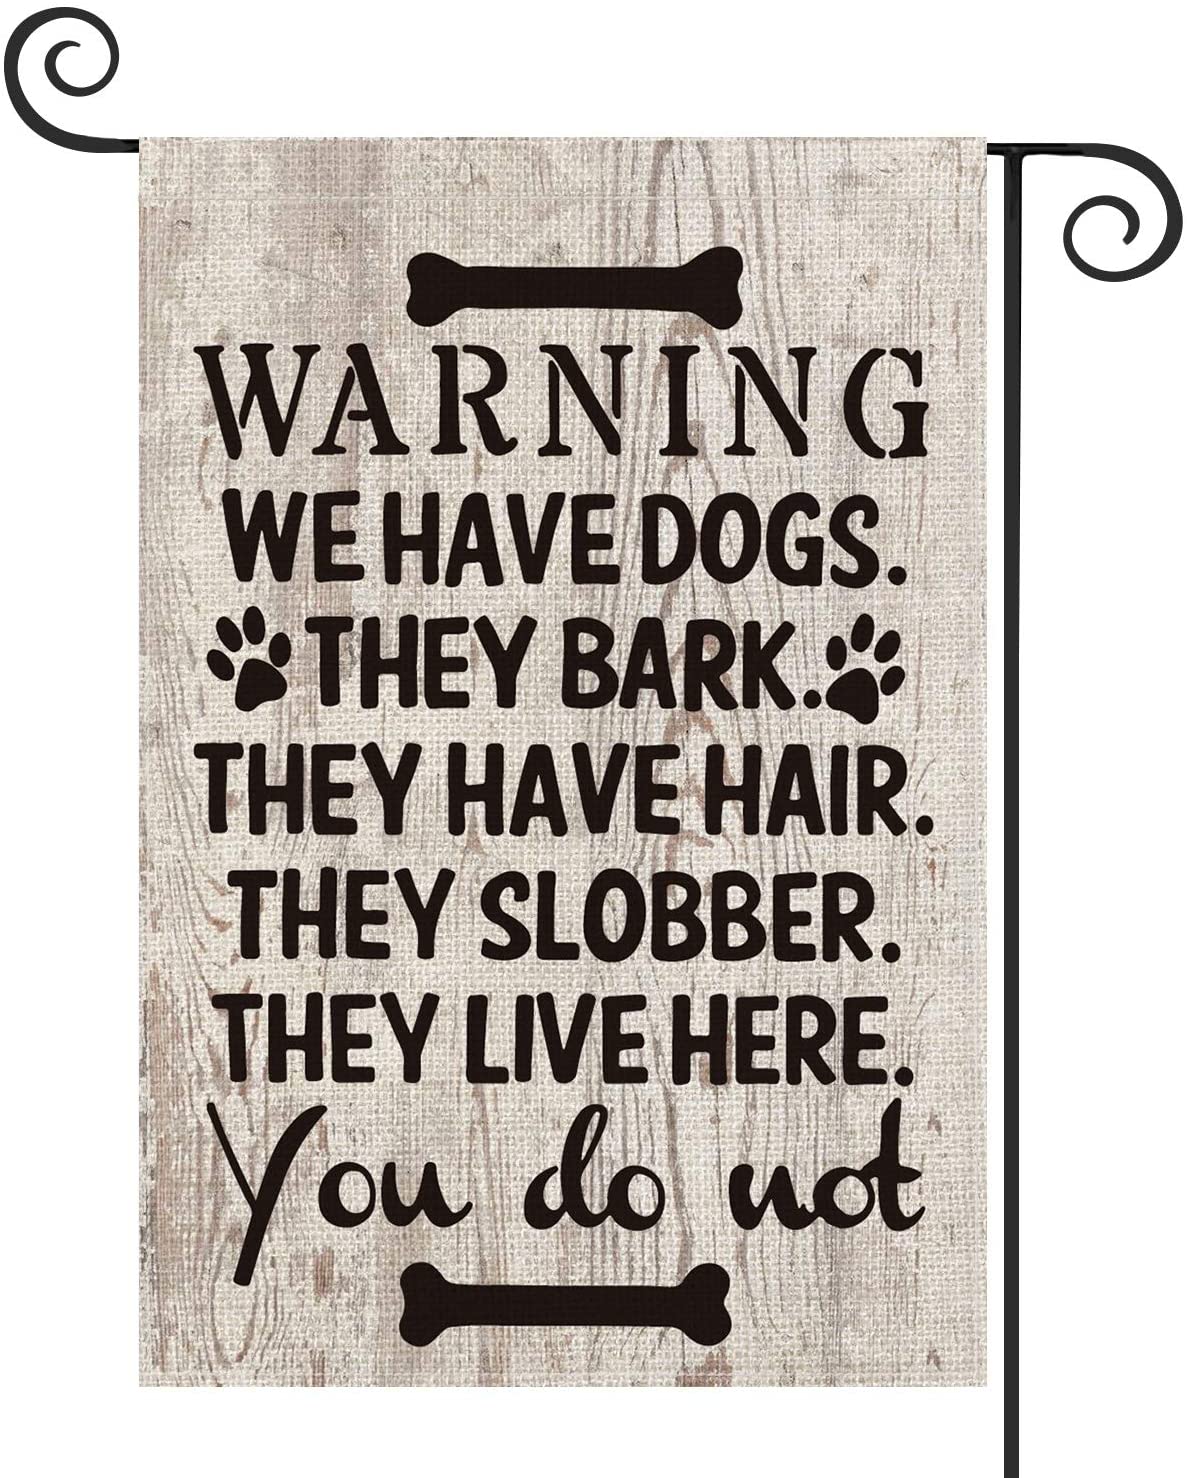 Dog Warning Slogan Wood Garden Flag Vertical Double Sized, They Slobber They Live Here Yard Outdoor Decoration 12.5 x 18 Inch